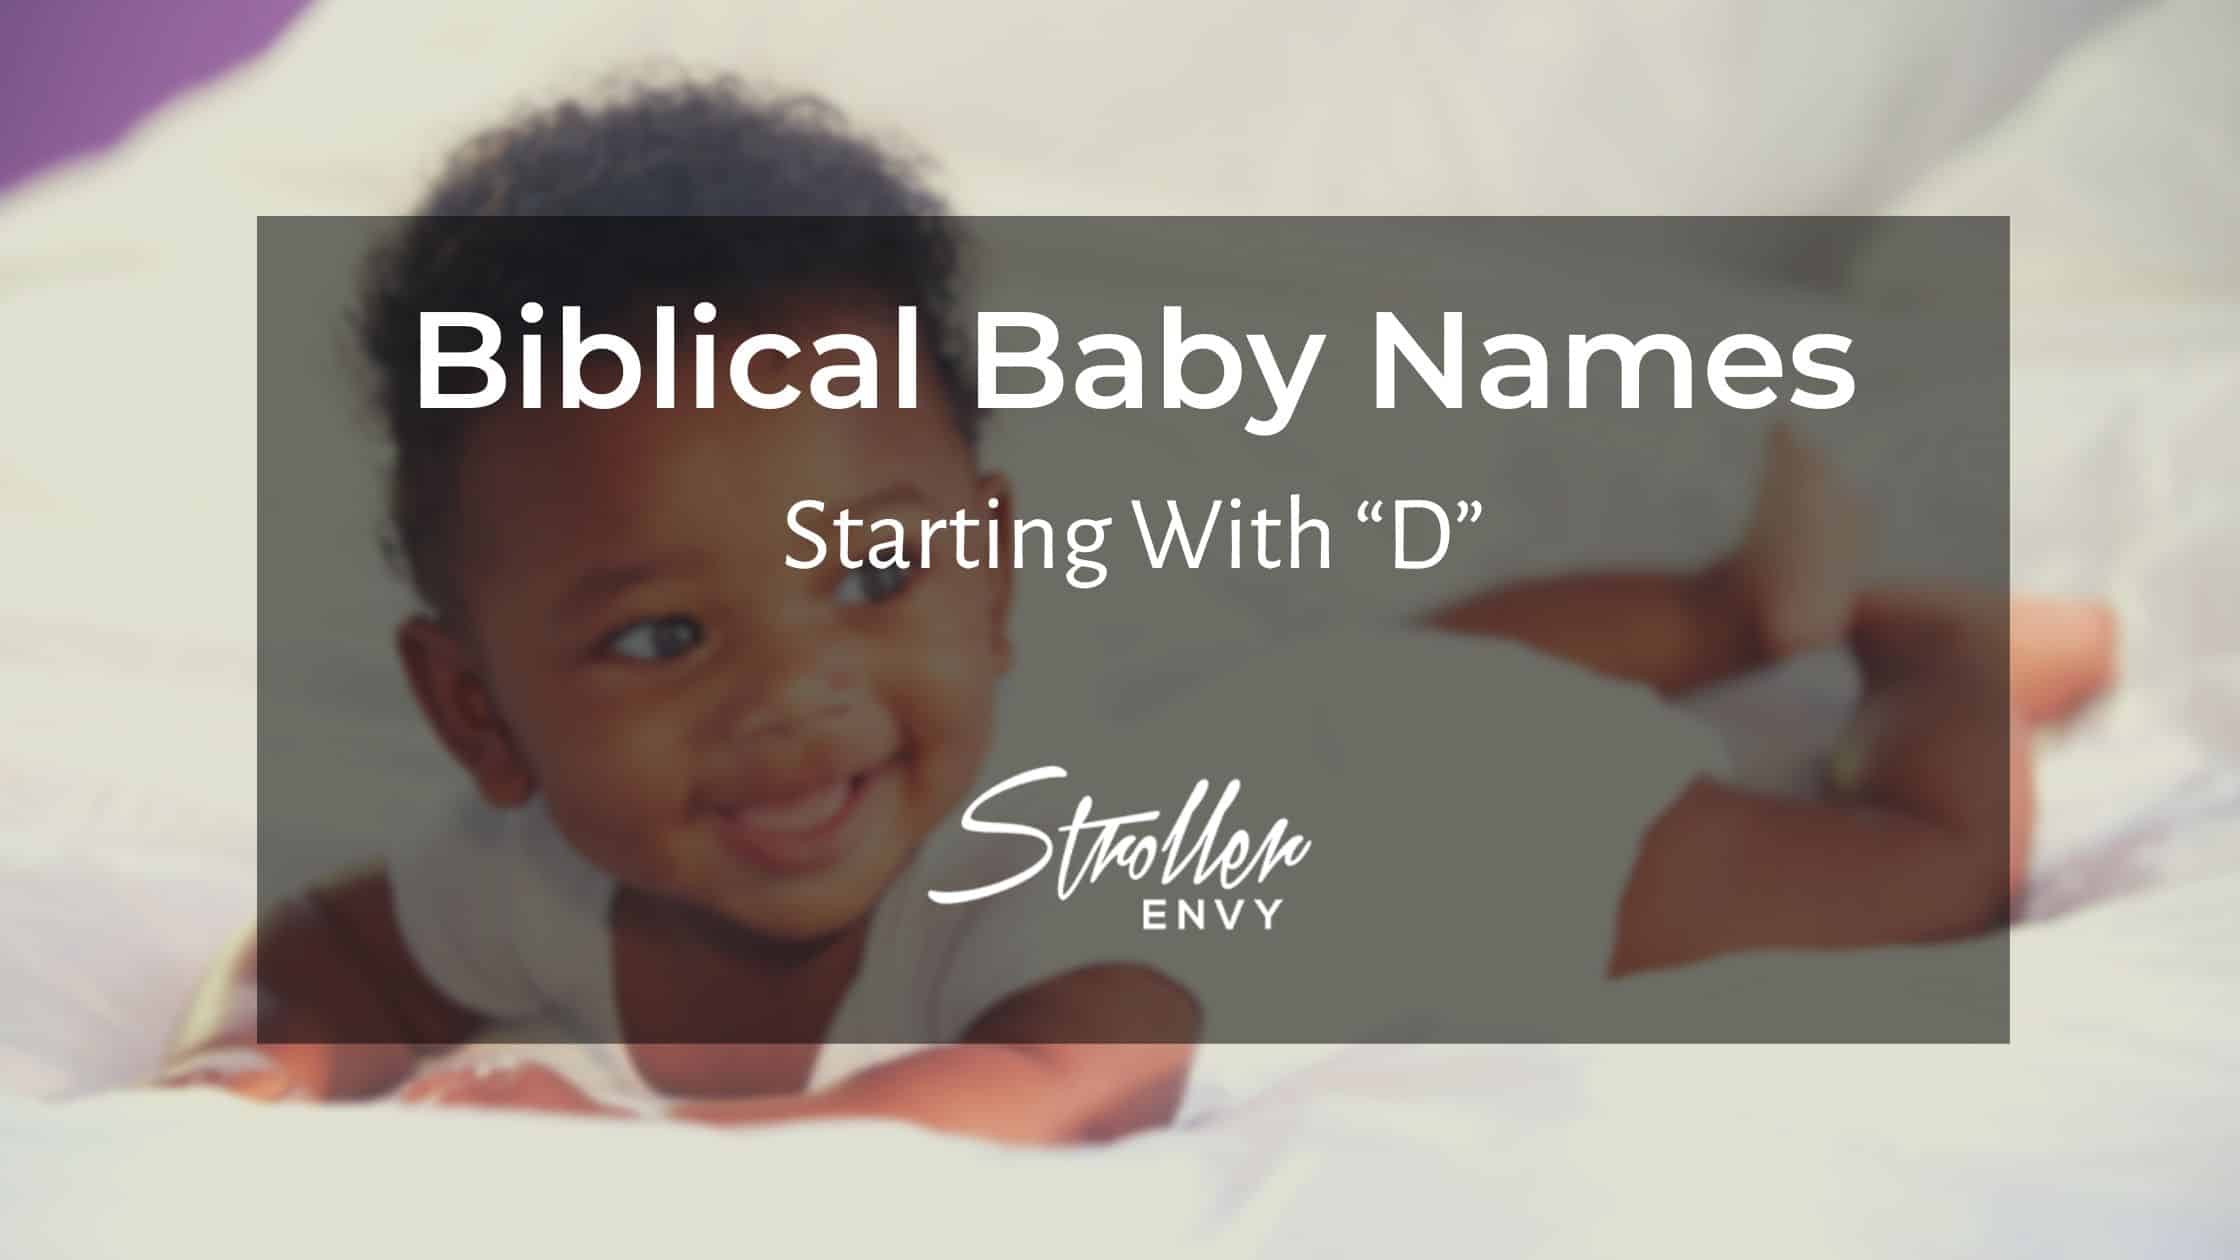 50 biblical baby names beginning with D